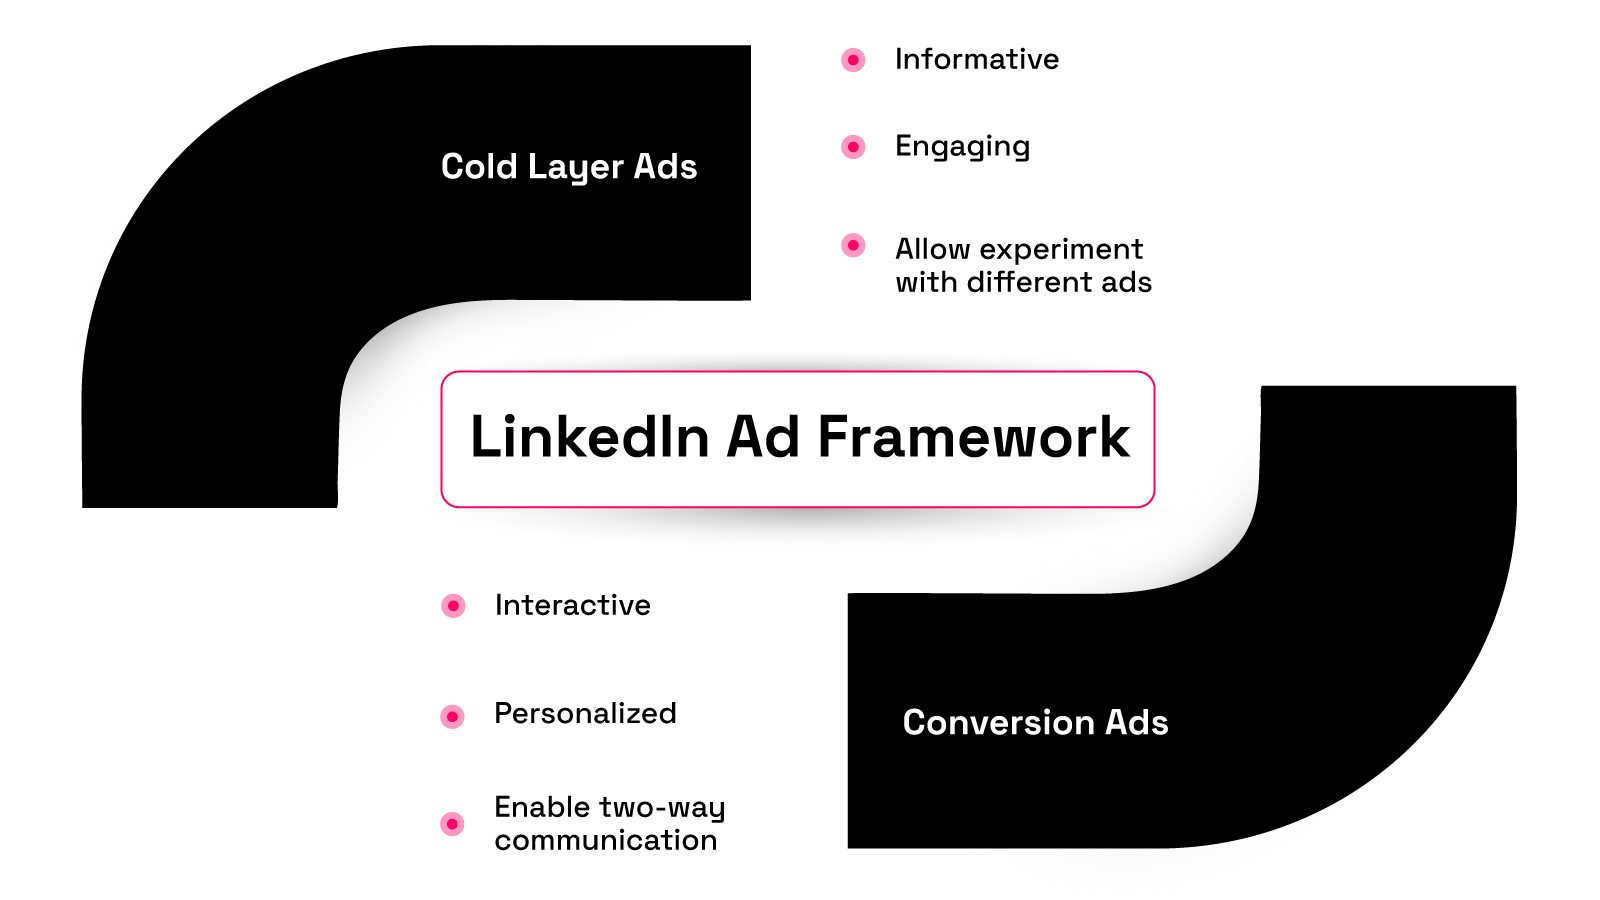 LinkedIn Ad Framework - Cold Layer Ads and Conversion Ads